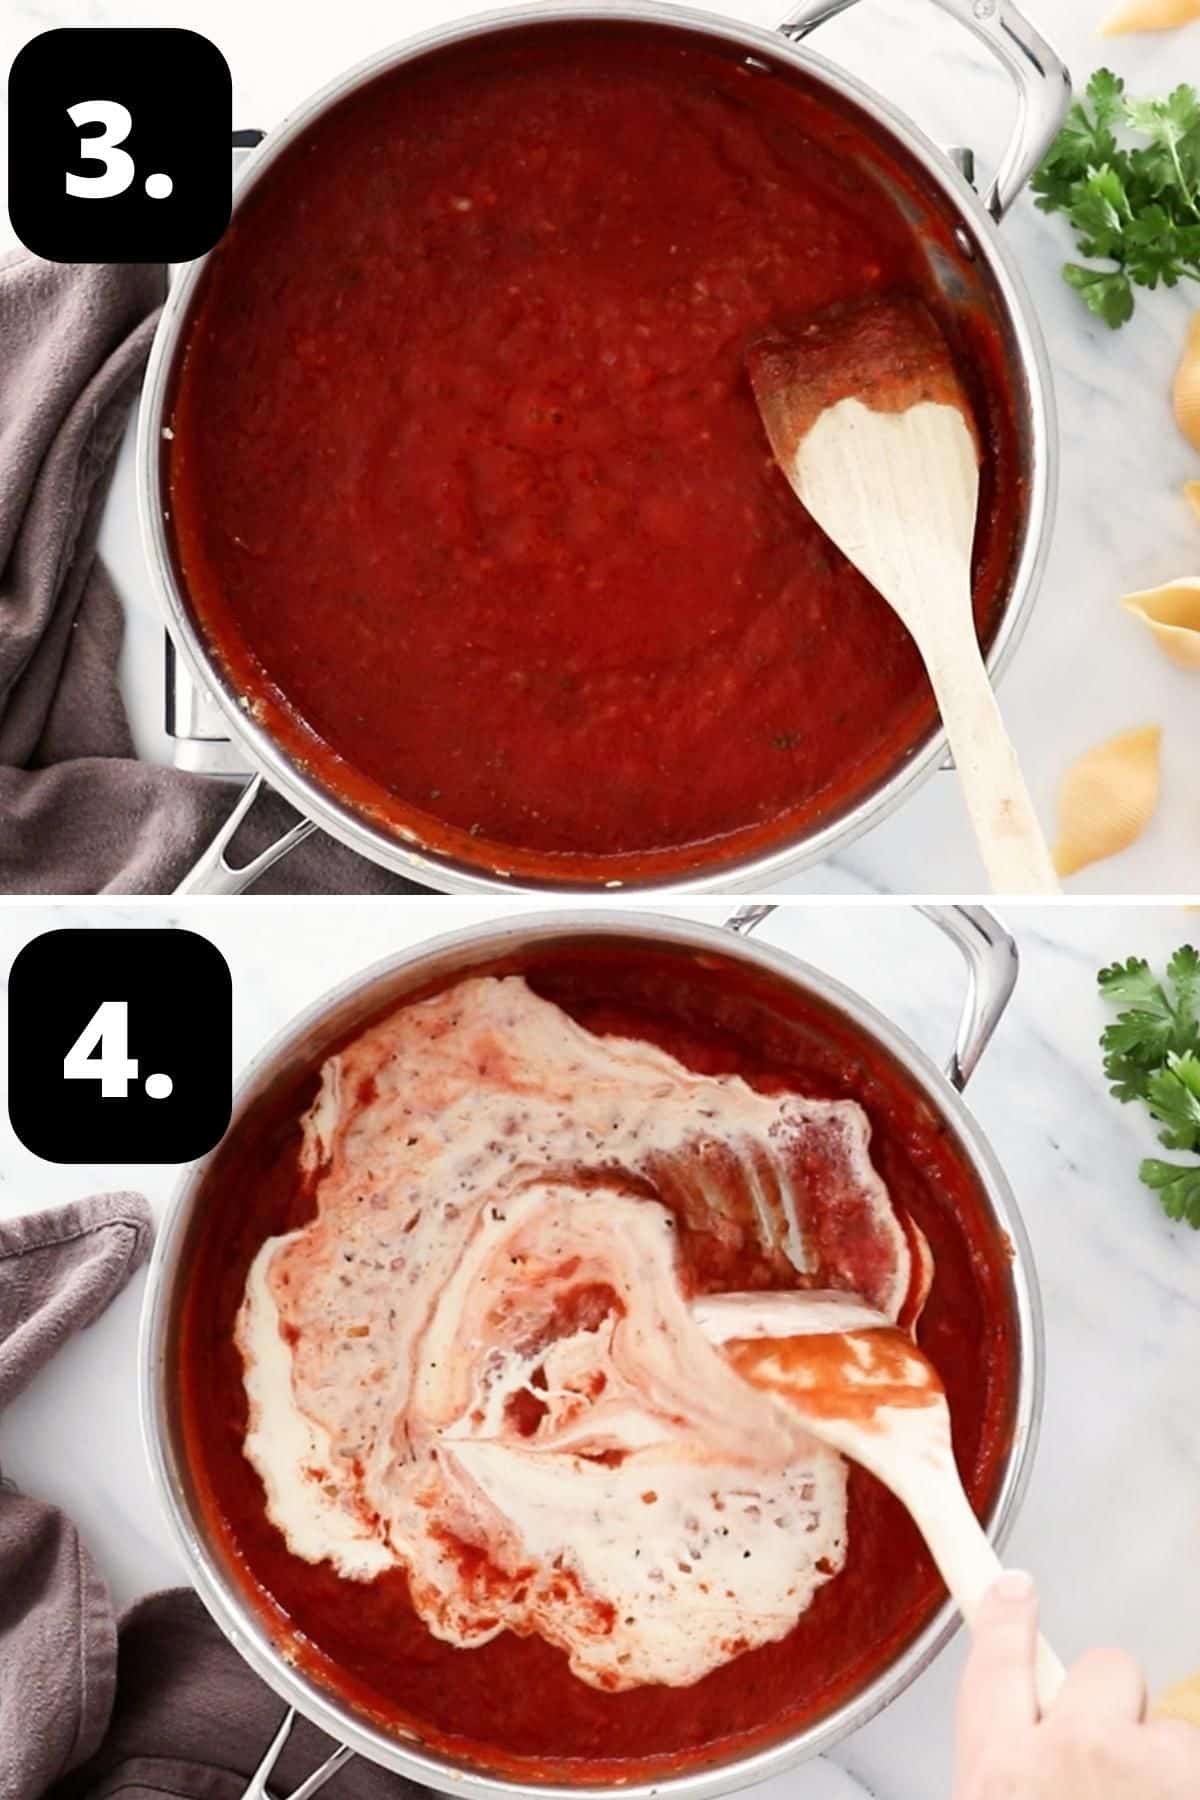 Steps 3-4 of preparing this recipe - the cooked tomato sauce and adding the cream to the sauce.